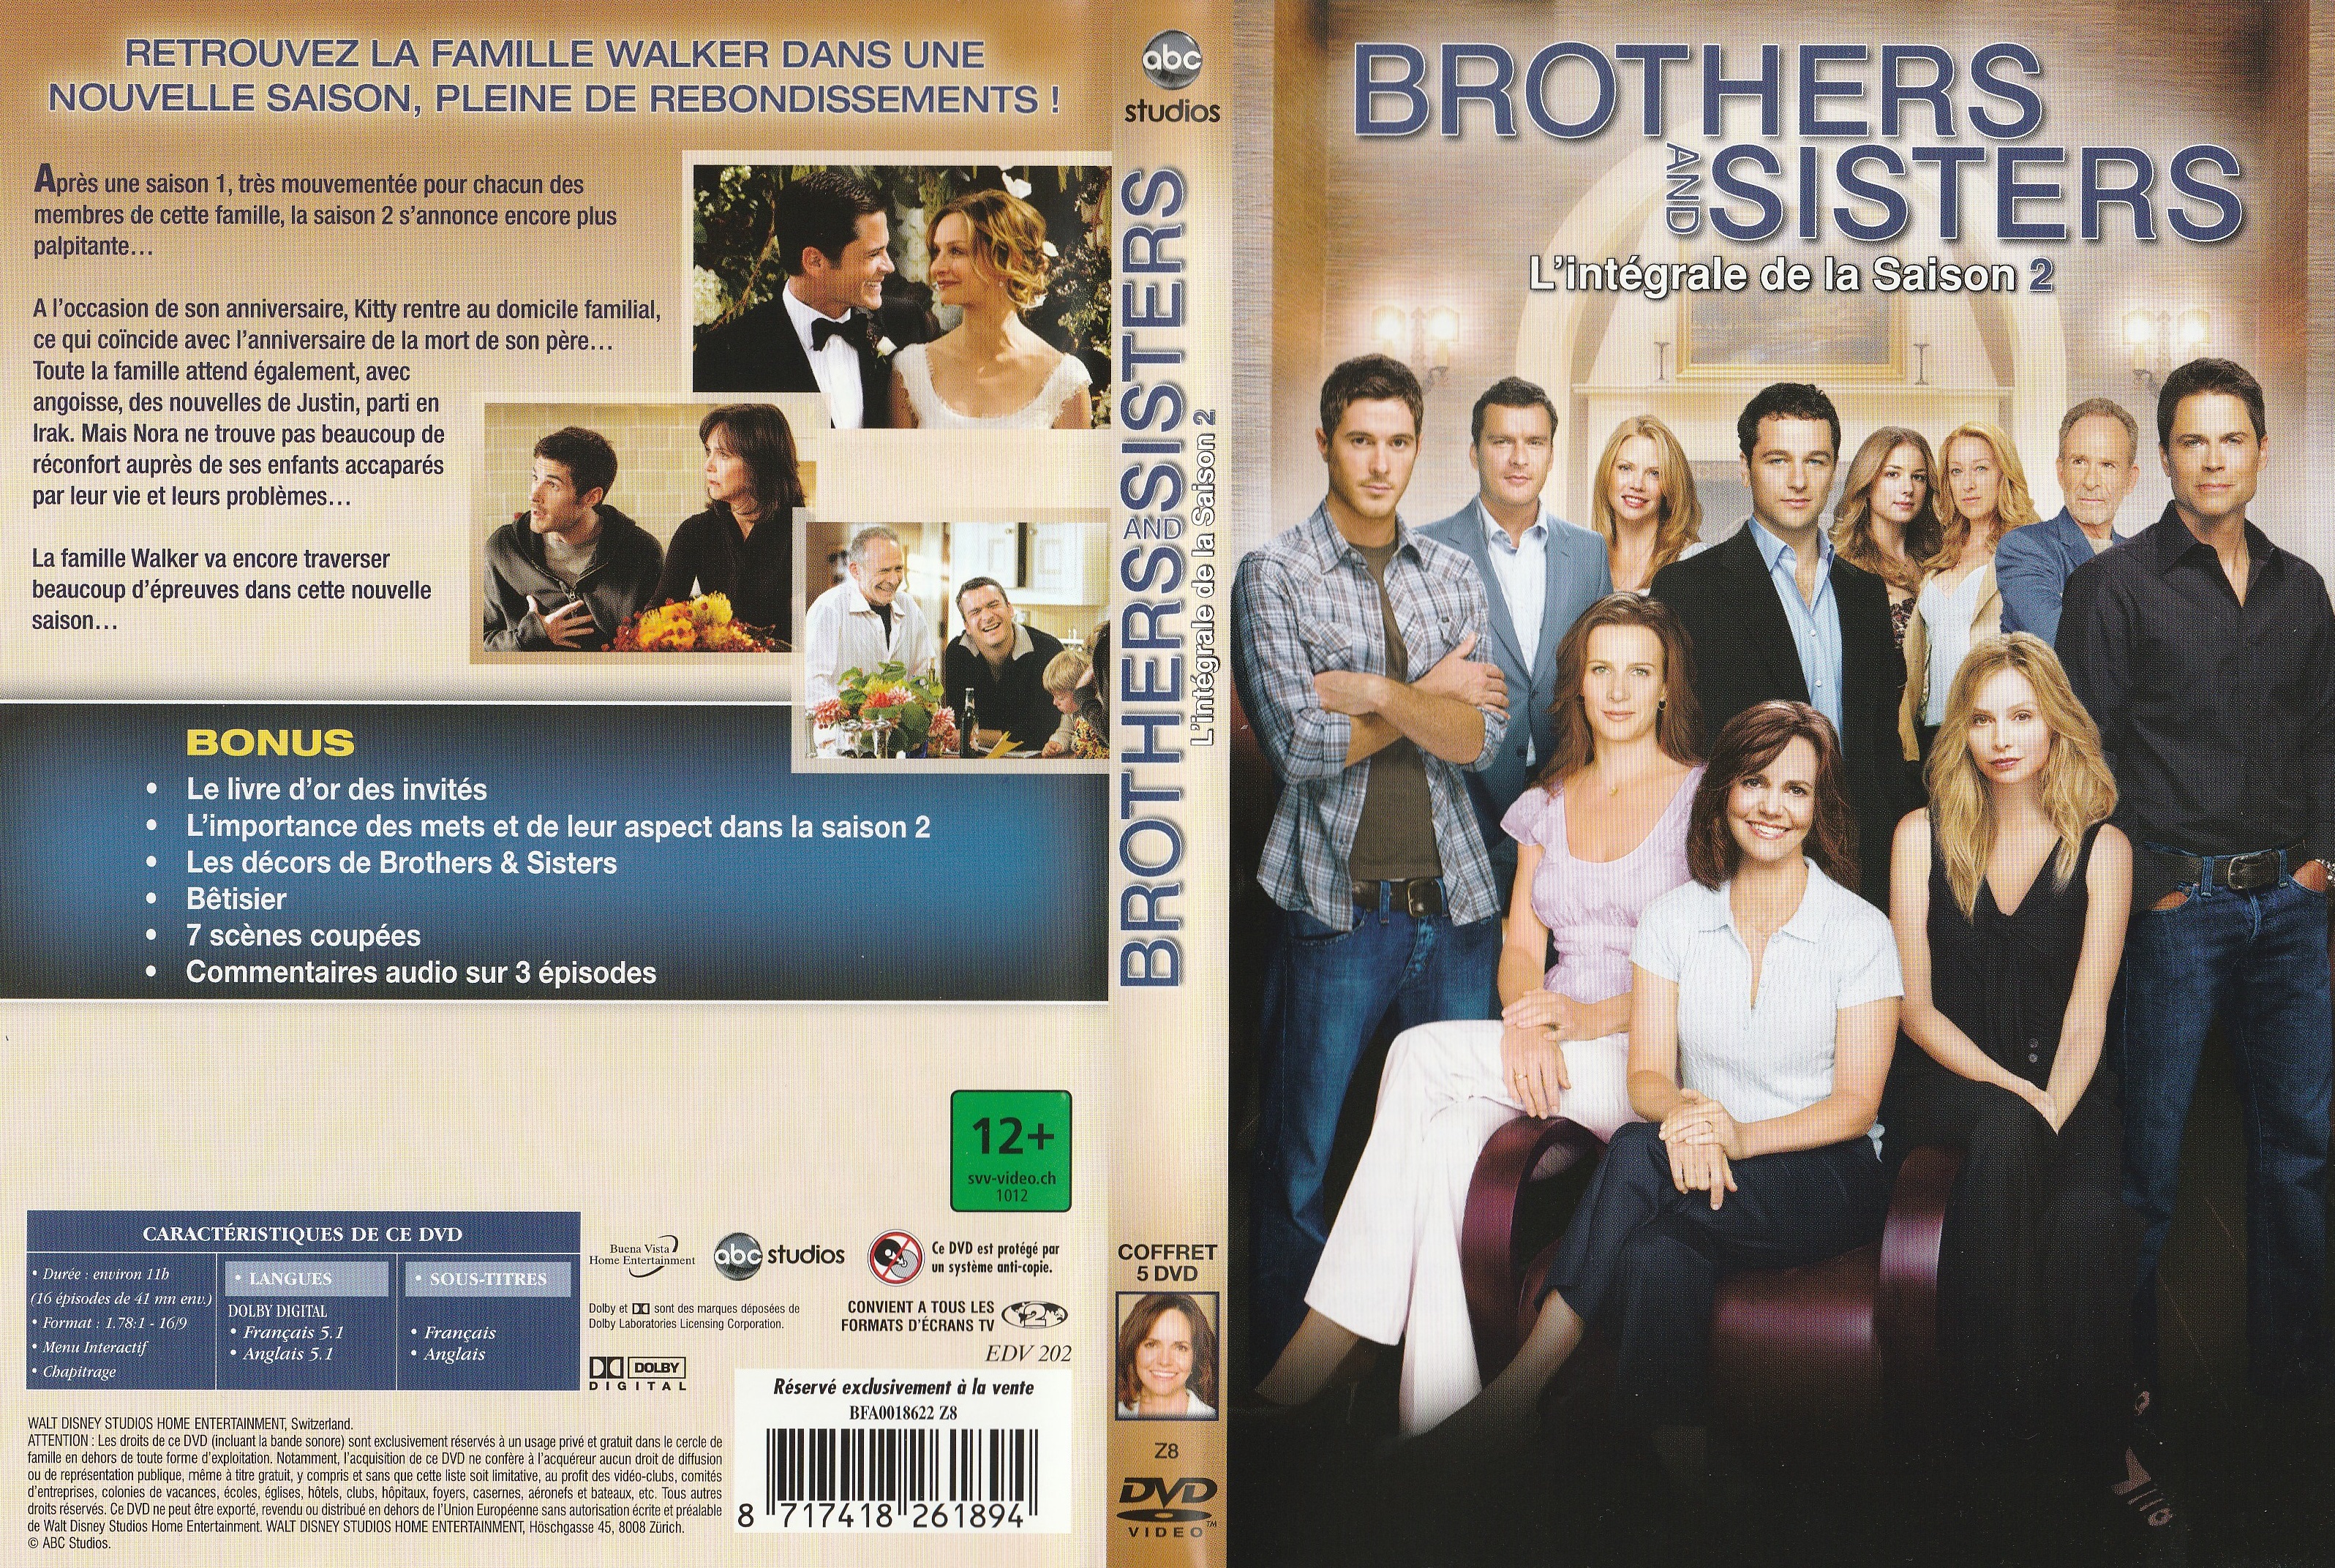 Jaquette DVD Brothers and Sisters Saison 2